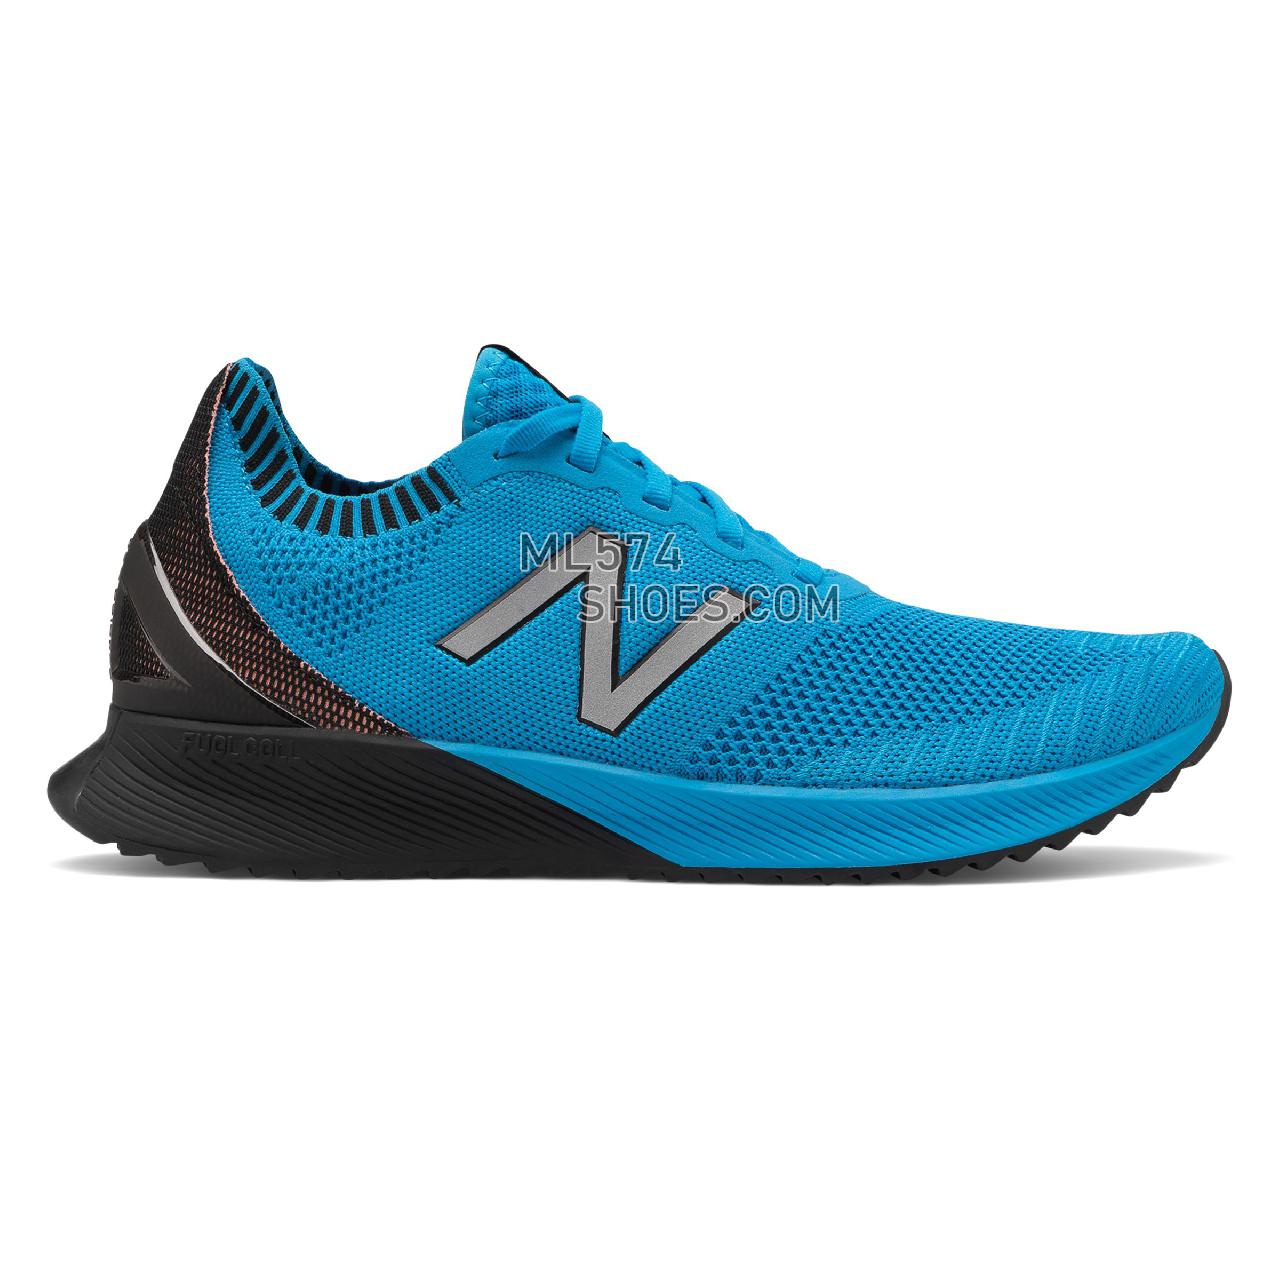 New Balance FuelCell Echo - Men's Neutral Running - Vision Blue with Black - MFCECCV